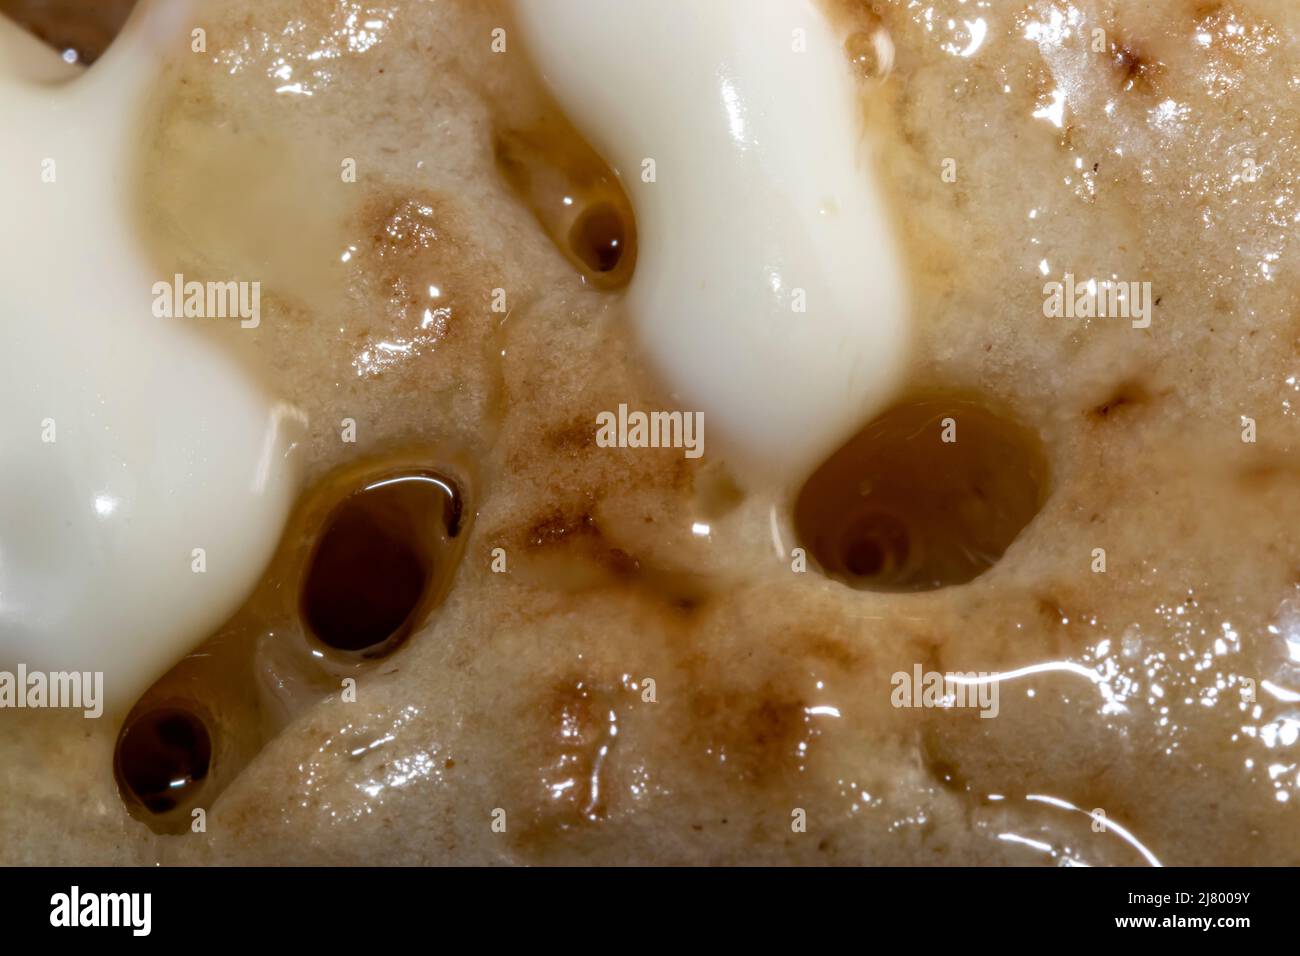 Macro of a Crumpet with Melting Butter Stock Photo